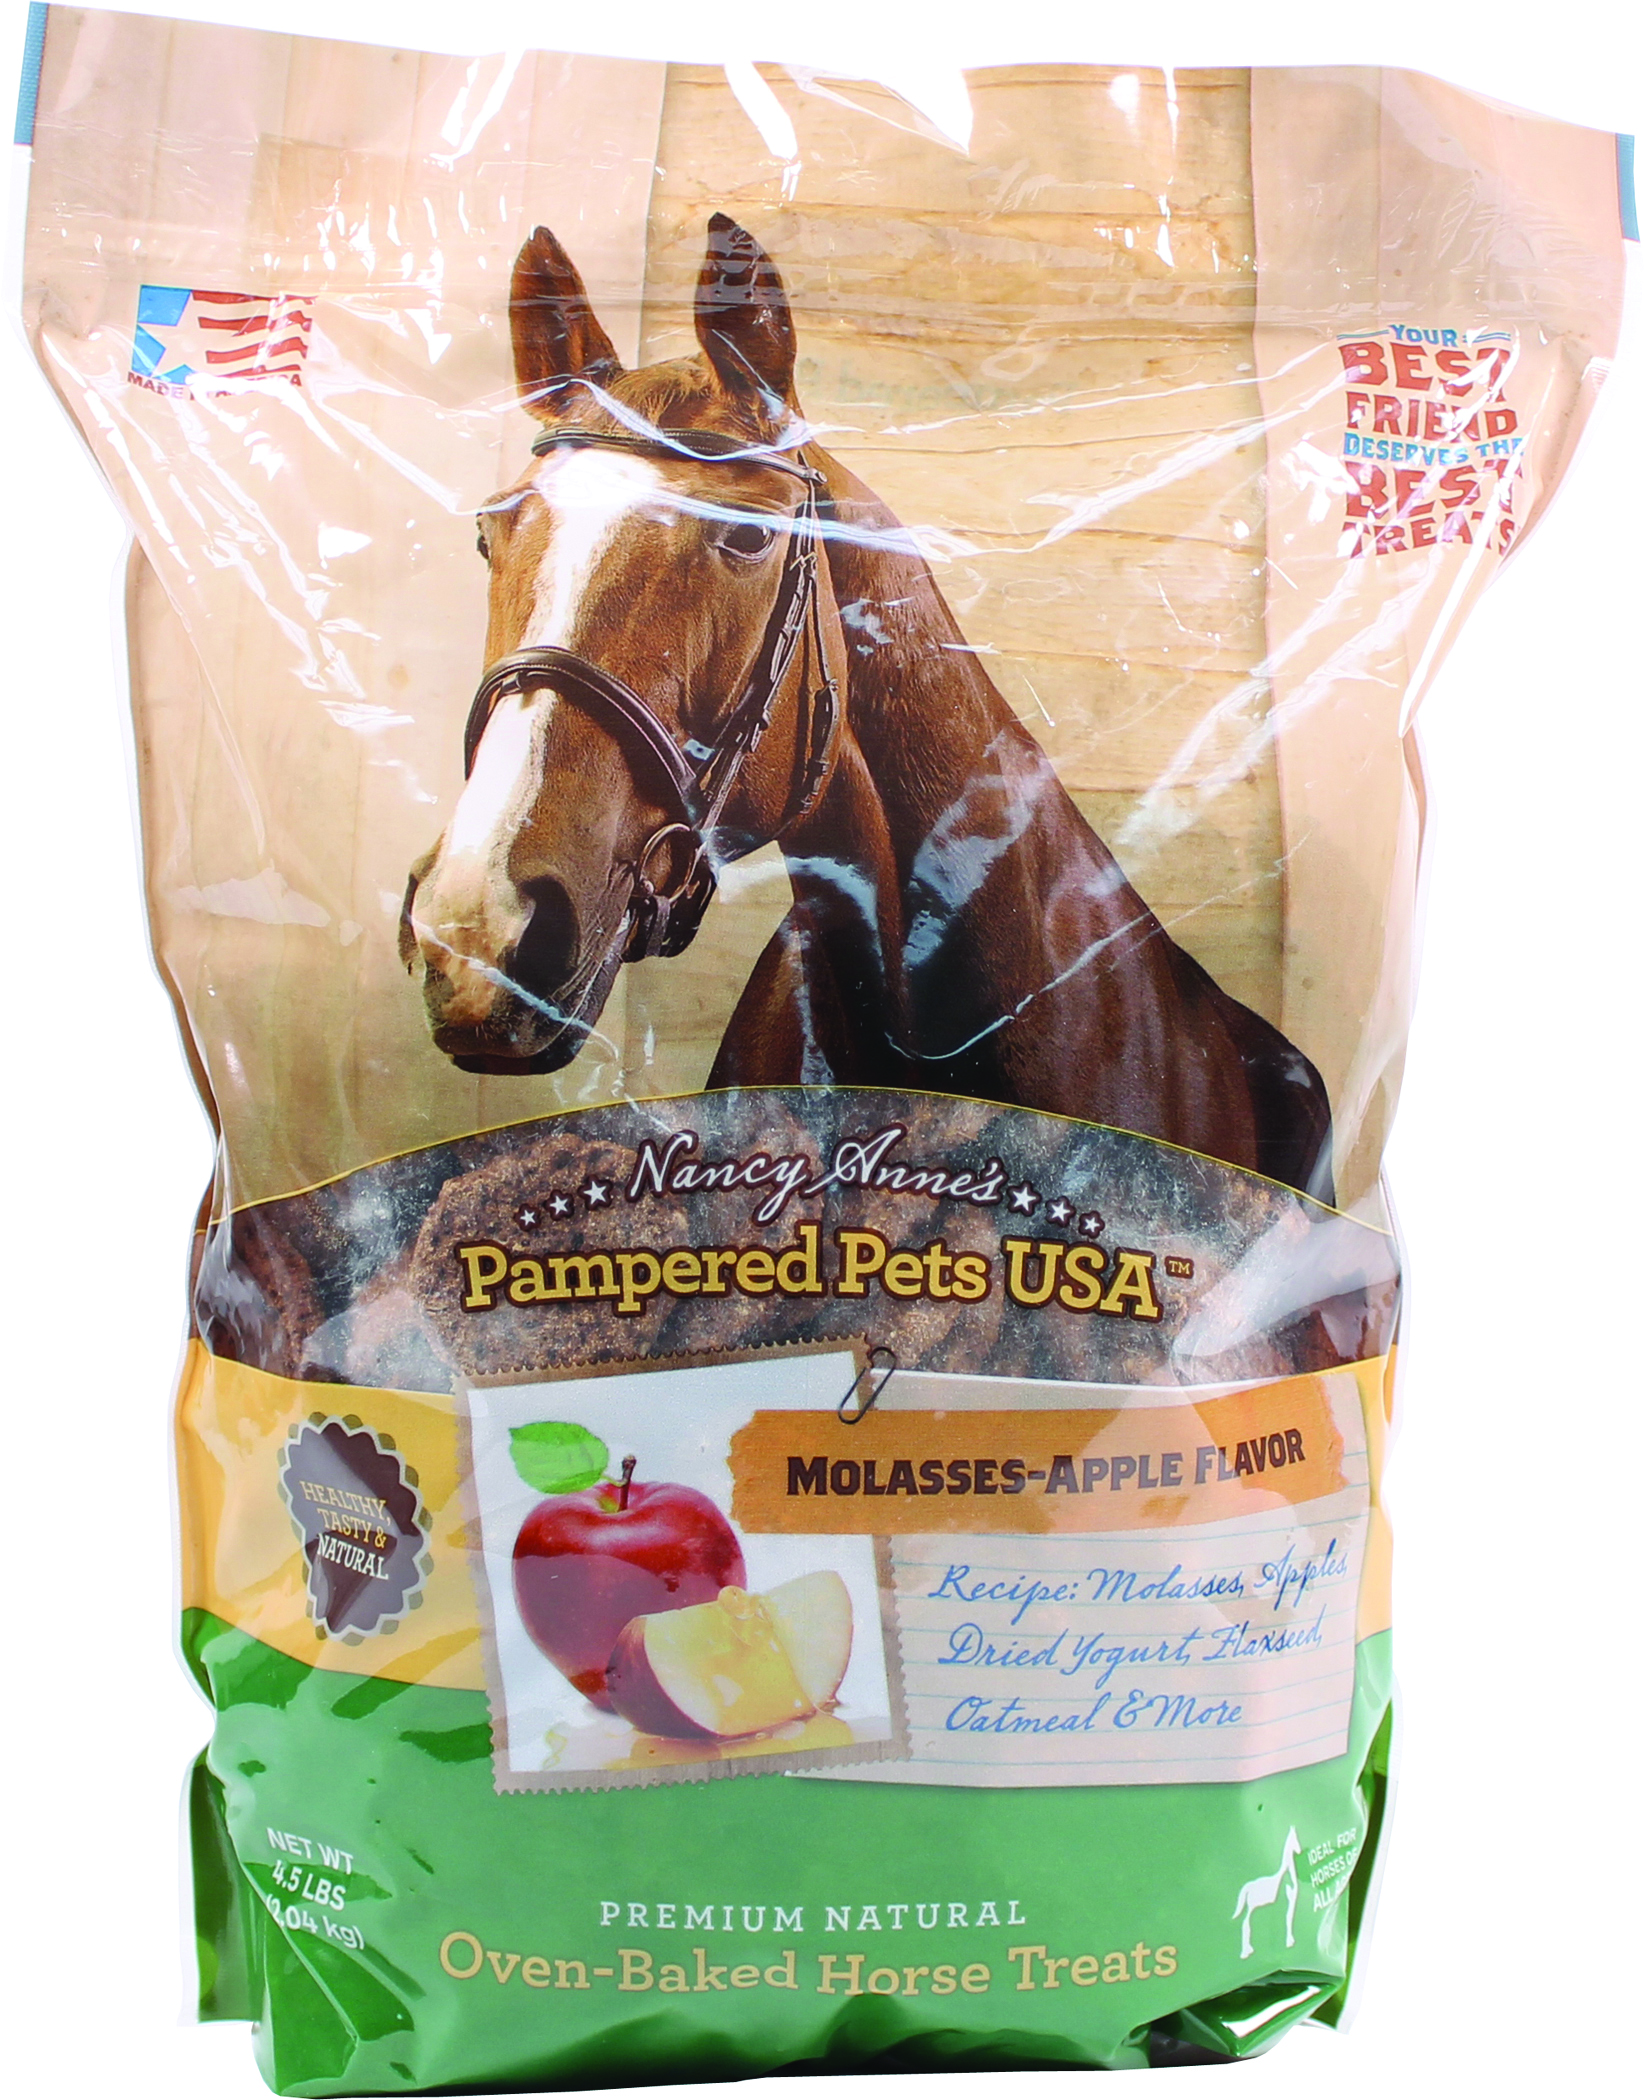 PREMIUM NATURAL OVEN BAKED HORSE TREATS